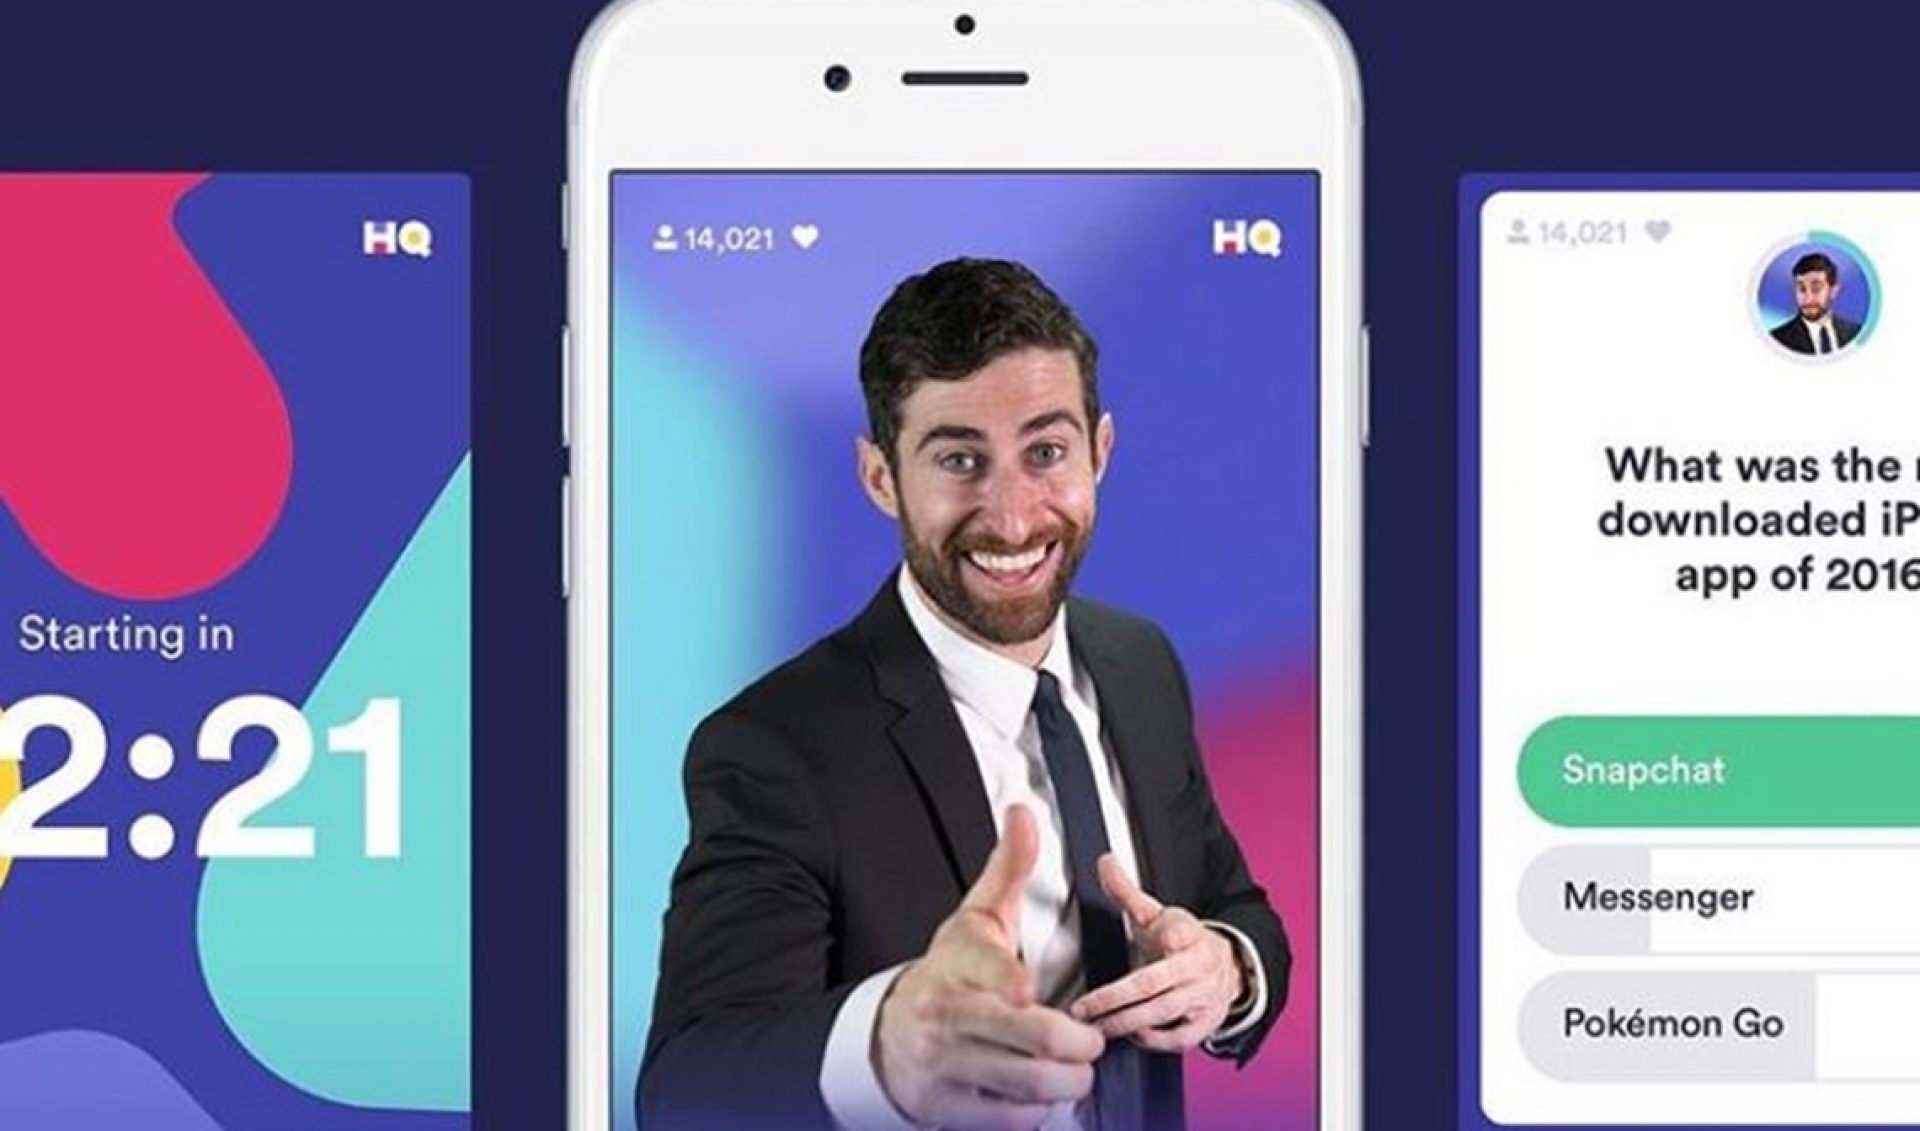 HQ Trivia Is Bleeding Users, Weathering CEO Drama Ahead Of Follow-Up ...